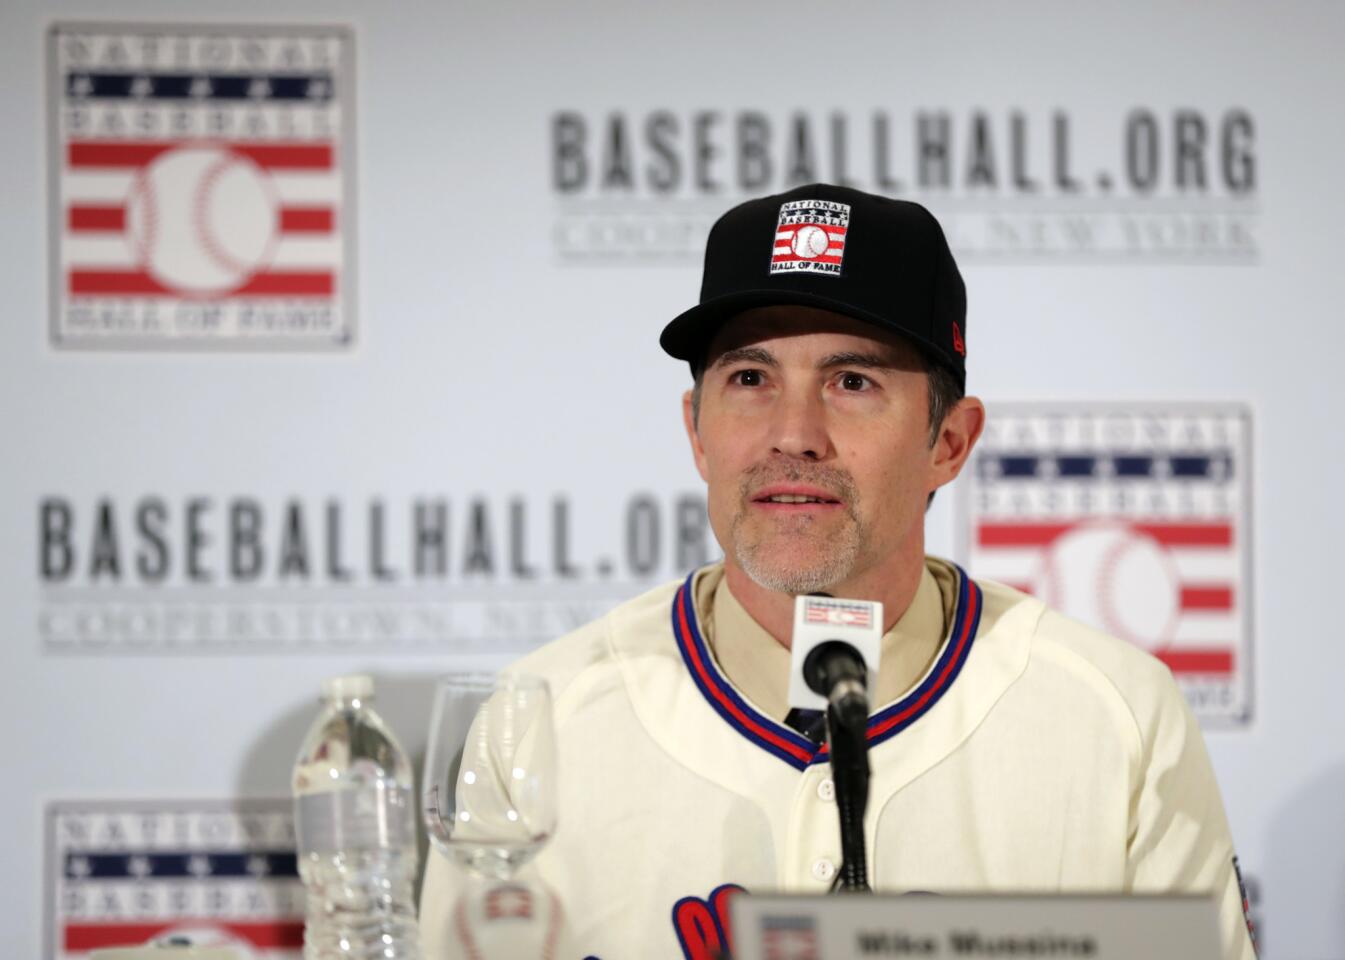 Baseball Hall of Fame inductee Mike Mussina speaks during a news conference Wednesday, Jan. 23, 2019, in New York.